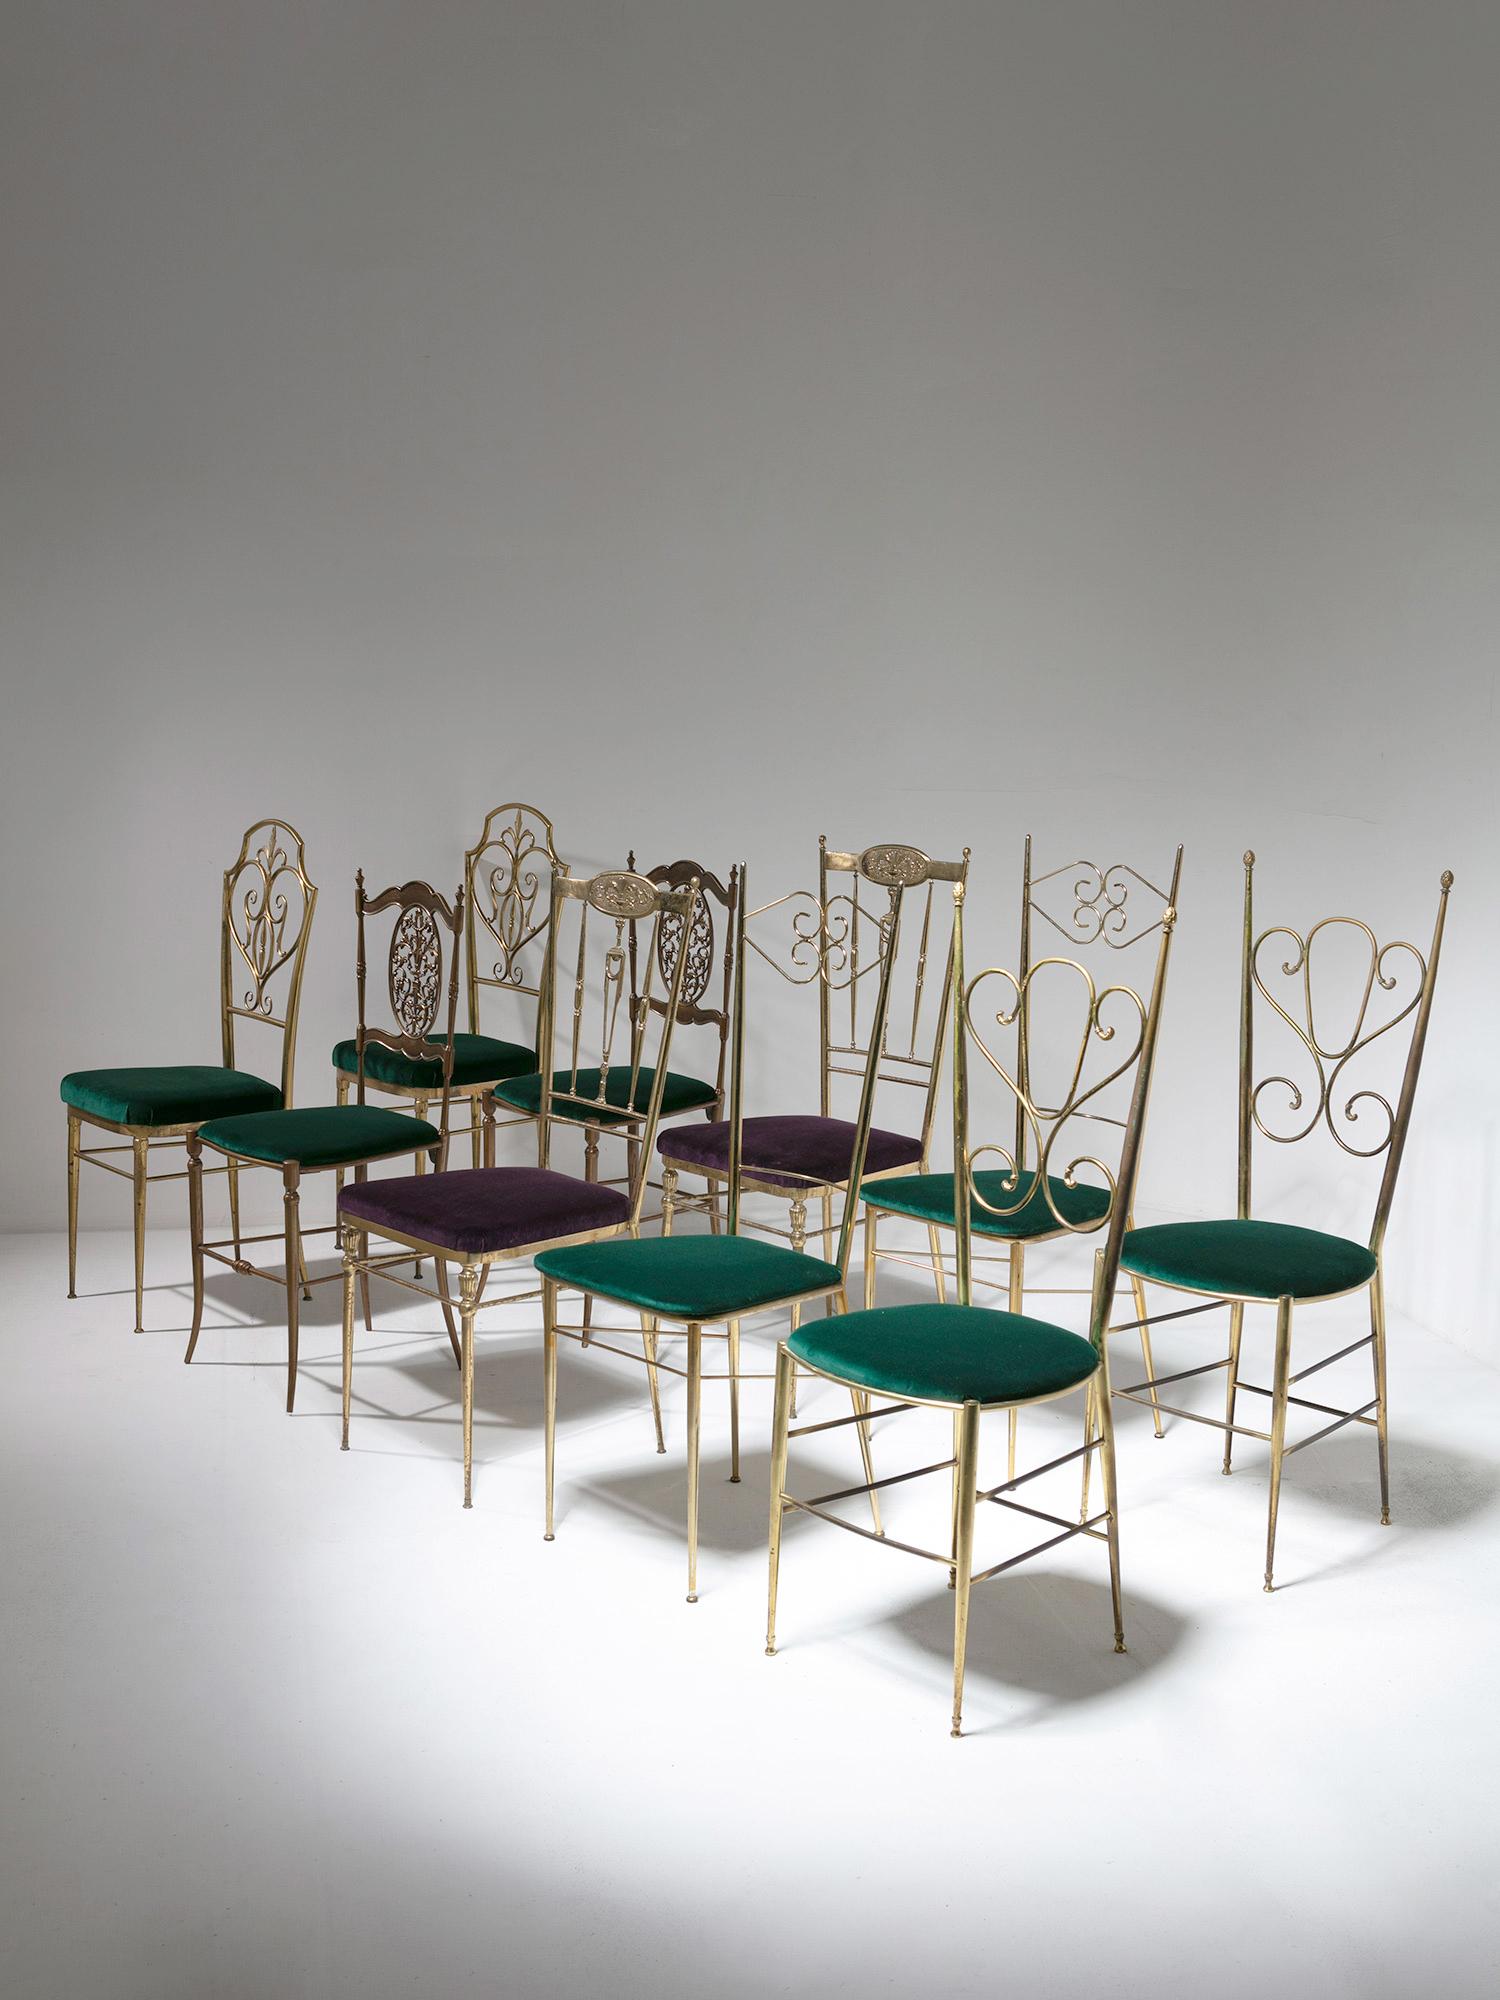 Set of five pairs of brass Chiavari chairs.
Every pair features different size and Baroque backrest shapes.
Four pair with green velvet seating, one pair with violet velvet cover.
Size refers to the tallest pair.